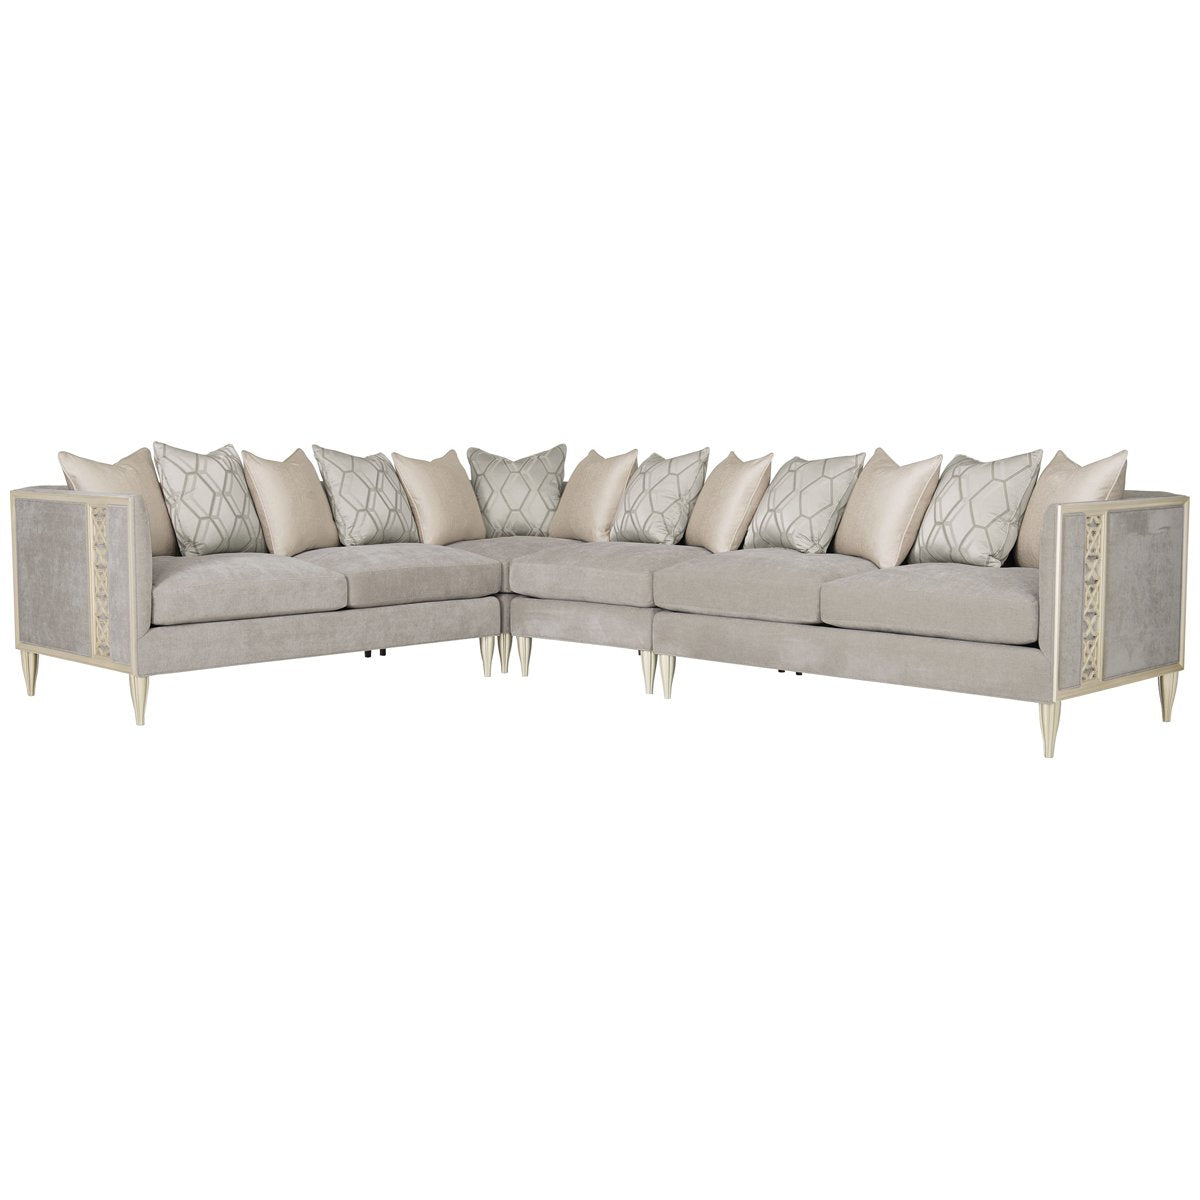 Caracole Upholstery Fret Knot Sectional